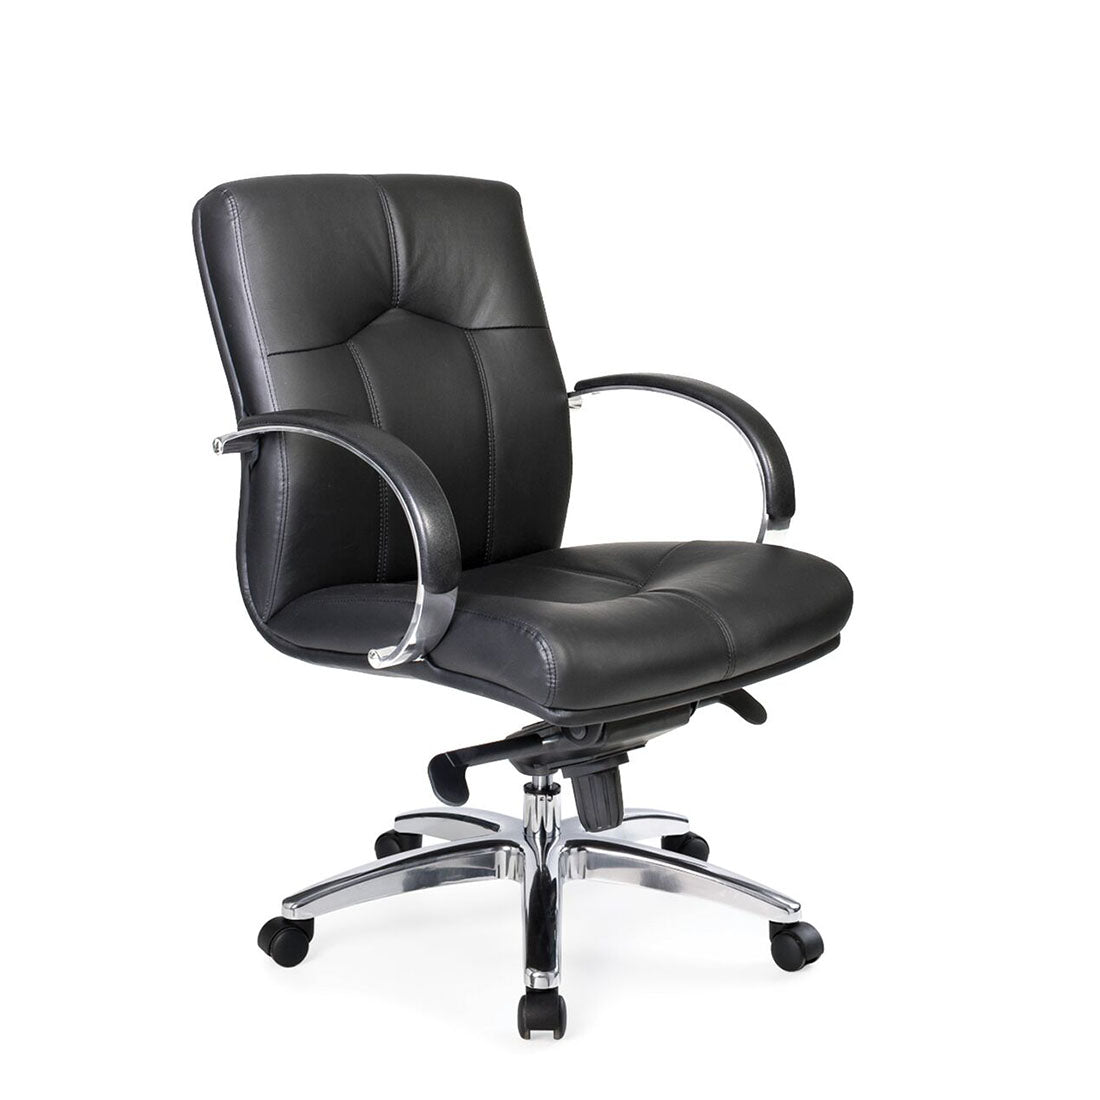 GM Executive Office Chair - switchoffice.com.au